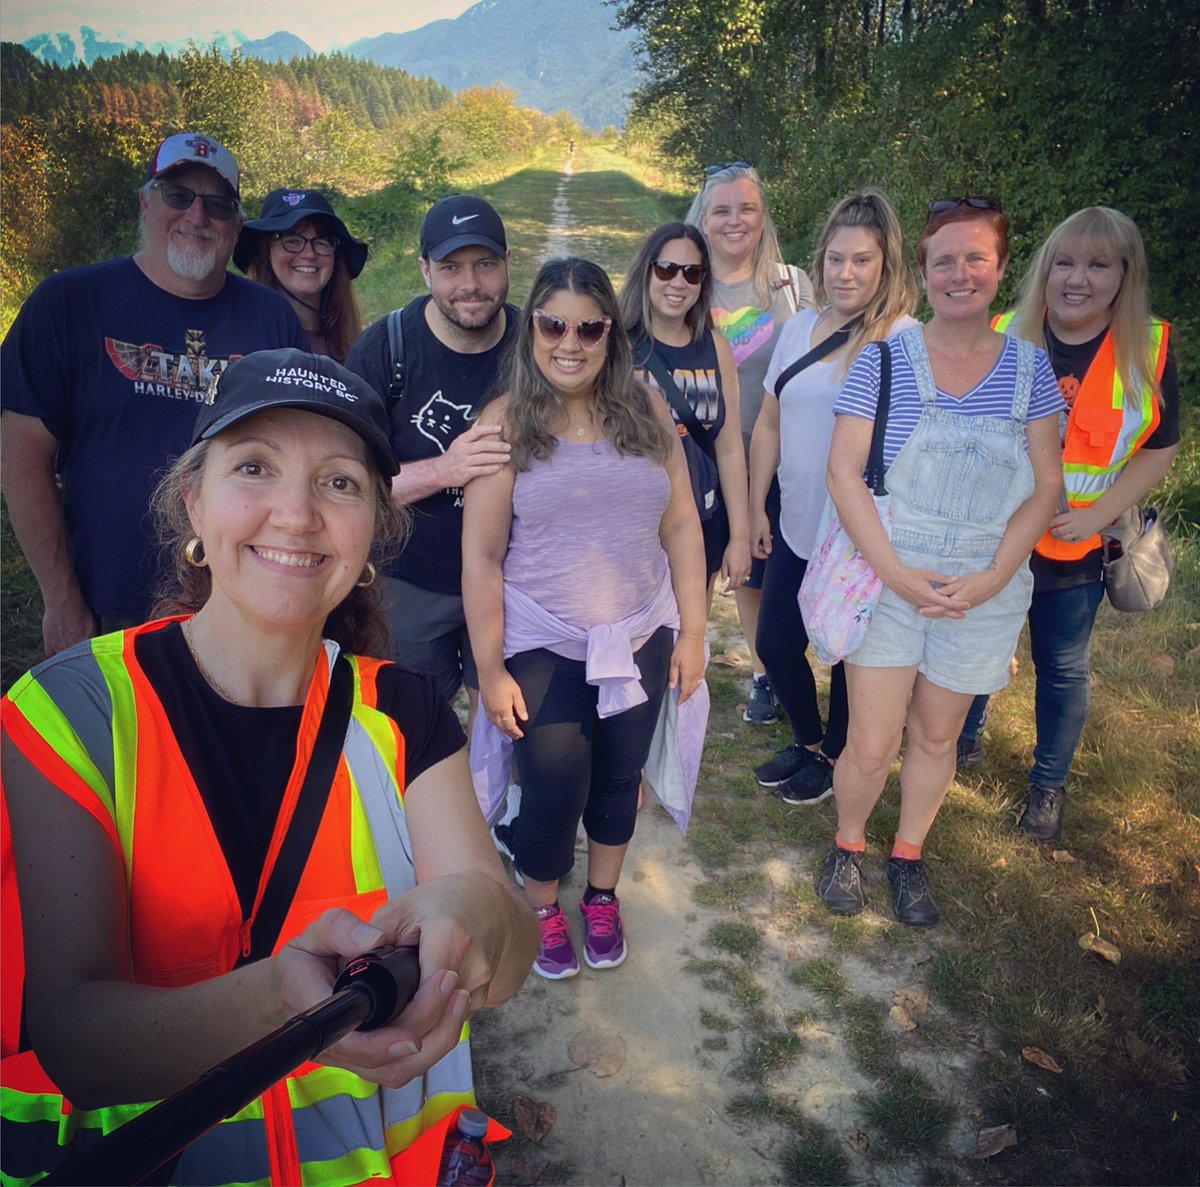 Amazing weekend as our Sasquatch walking tours kicked off at Pitt Lake BC!  We talked #aliens, #UFOs #Bigfoot and #ghosts Thank you to all who came out. We appreciate you all helping us bring this spooky little venture to life. #paranormal #spooky #bchistory #haunted #cryptid